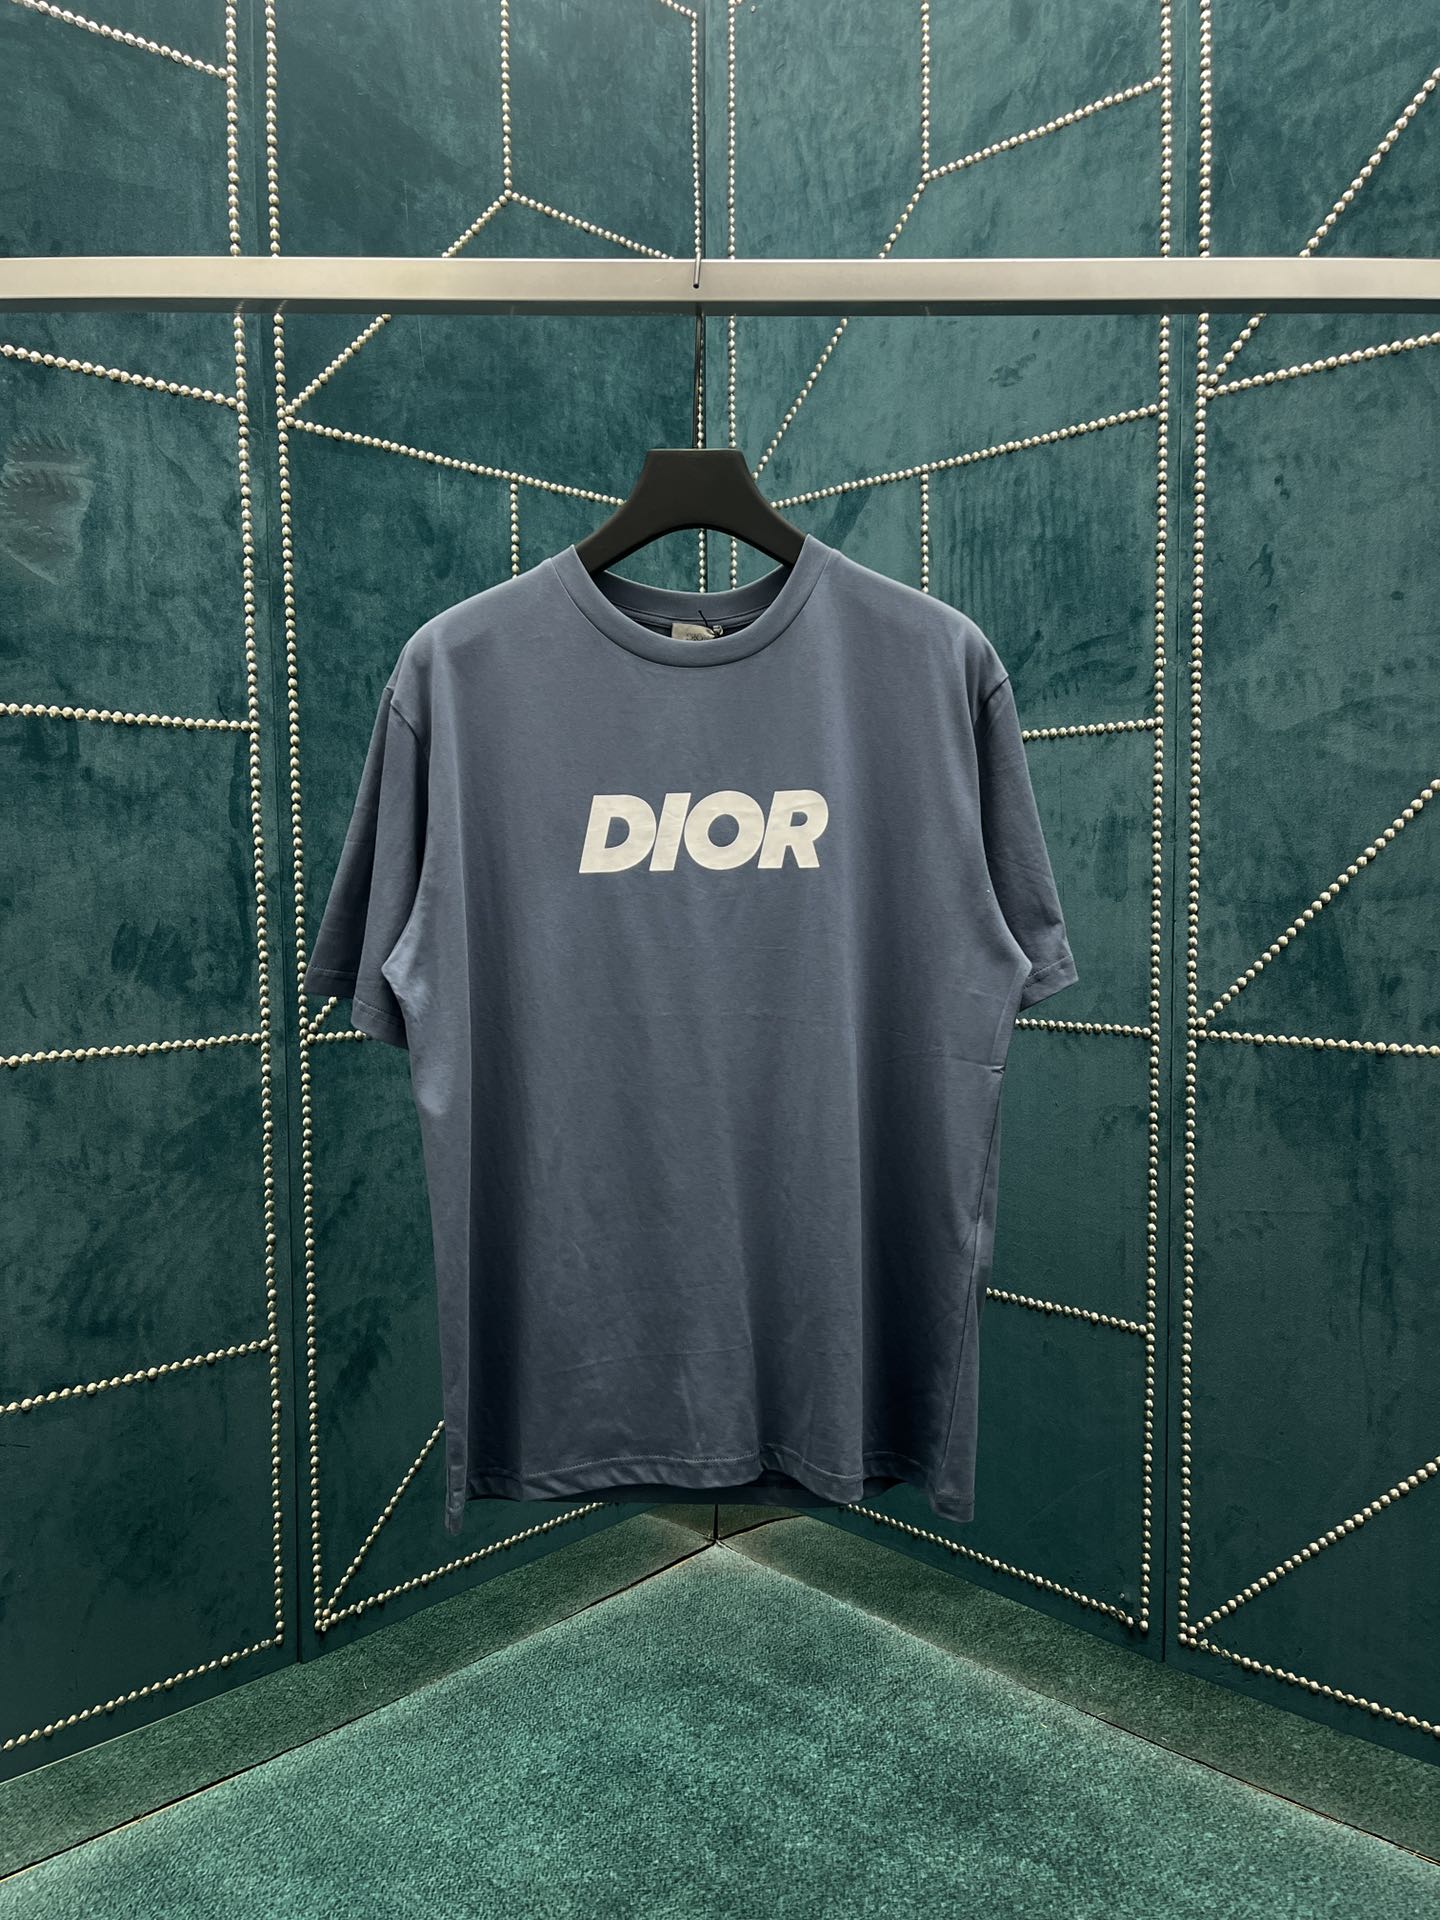 Dior Clothing T-Shirt Printing Unisex Spring/Summer Collection